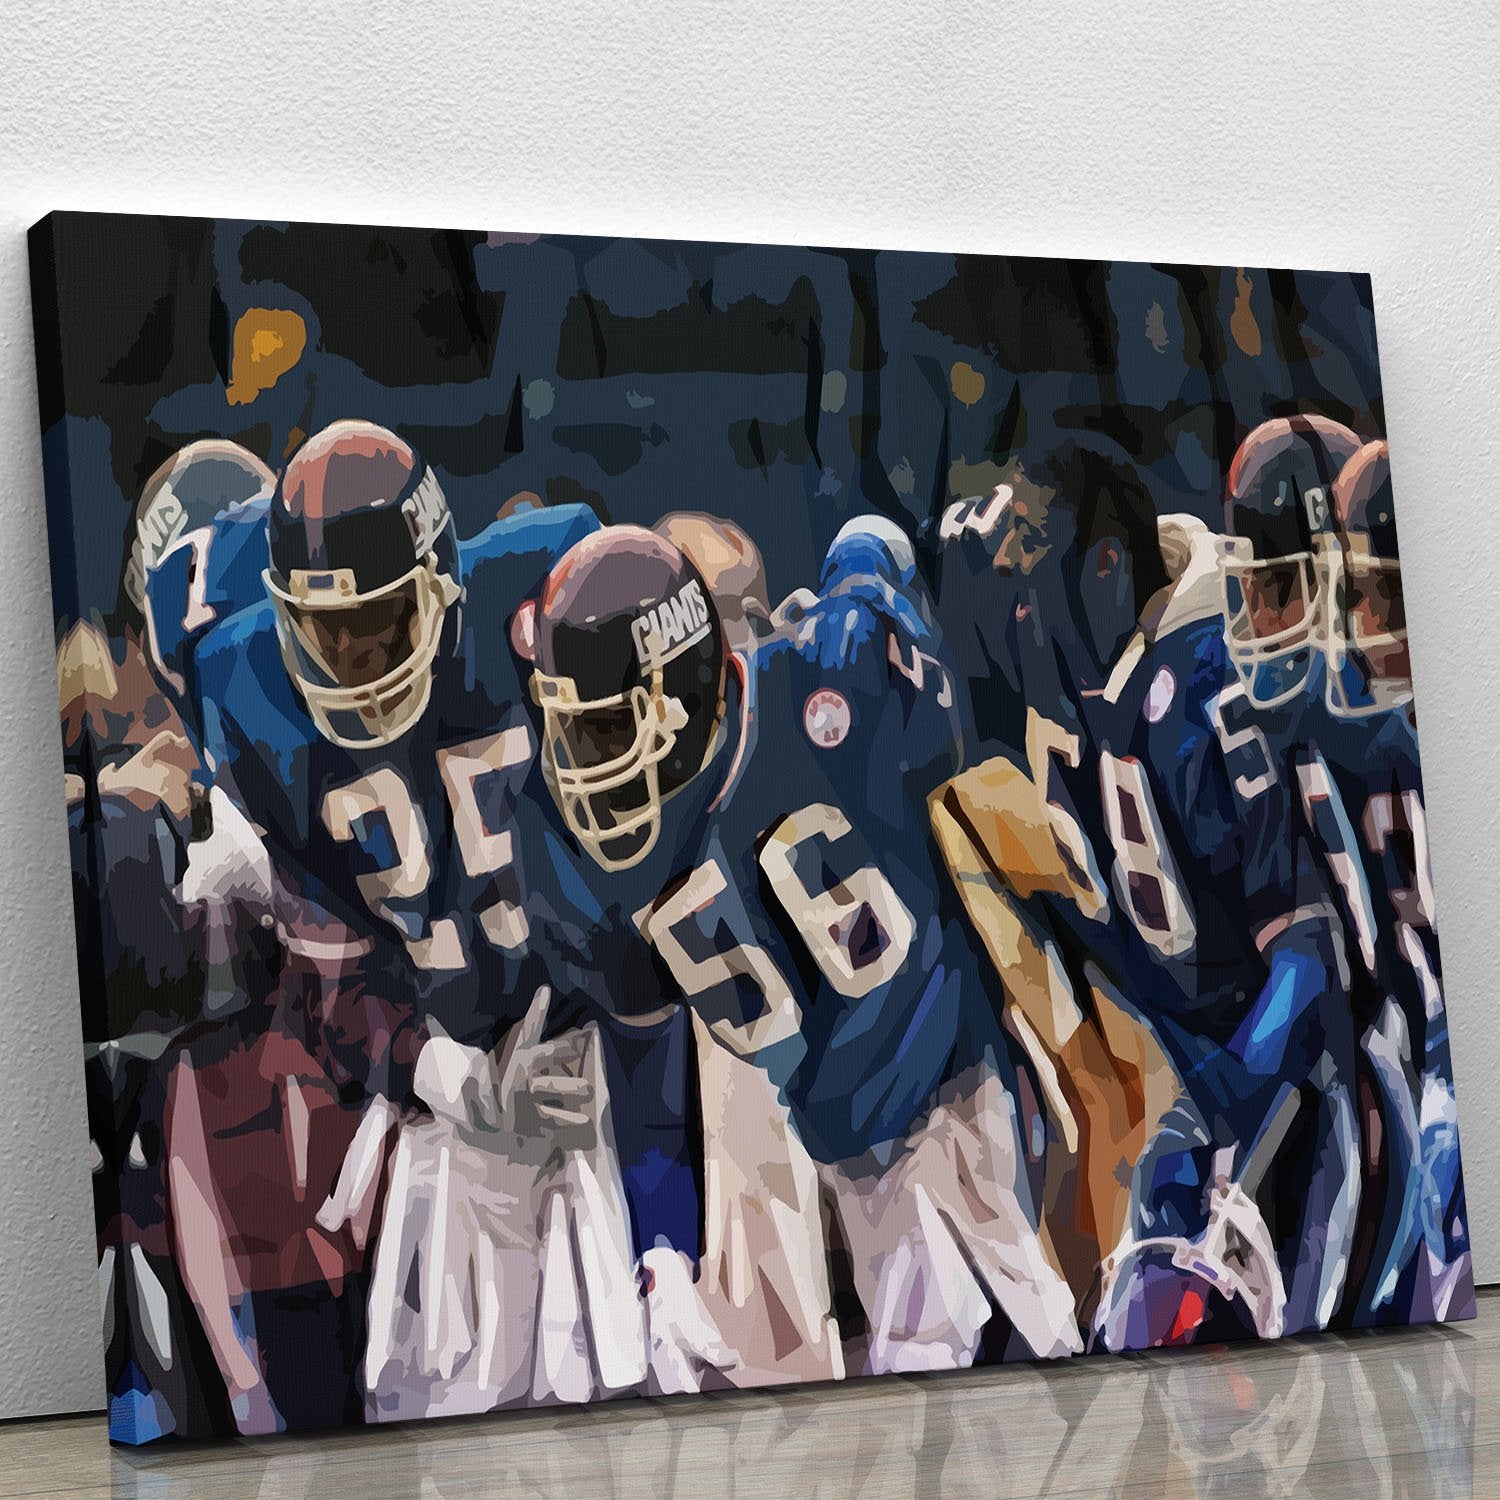  Lawrence Taylor Giants Poster, Lawrence Taylor Art